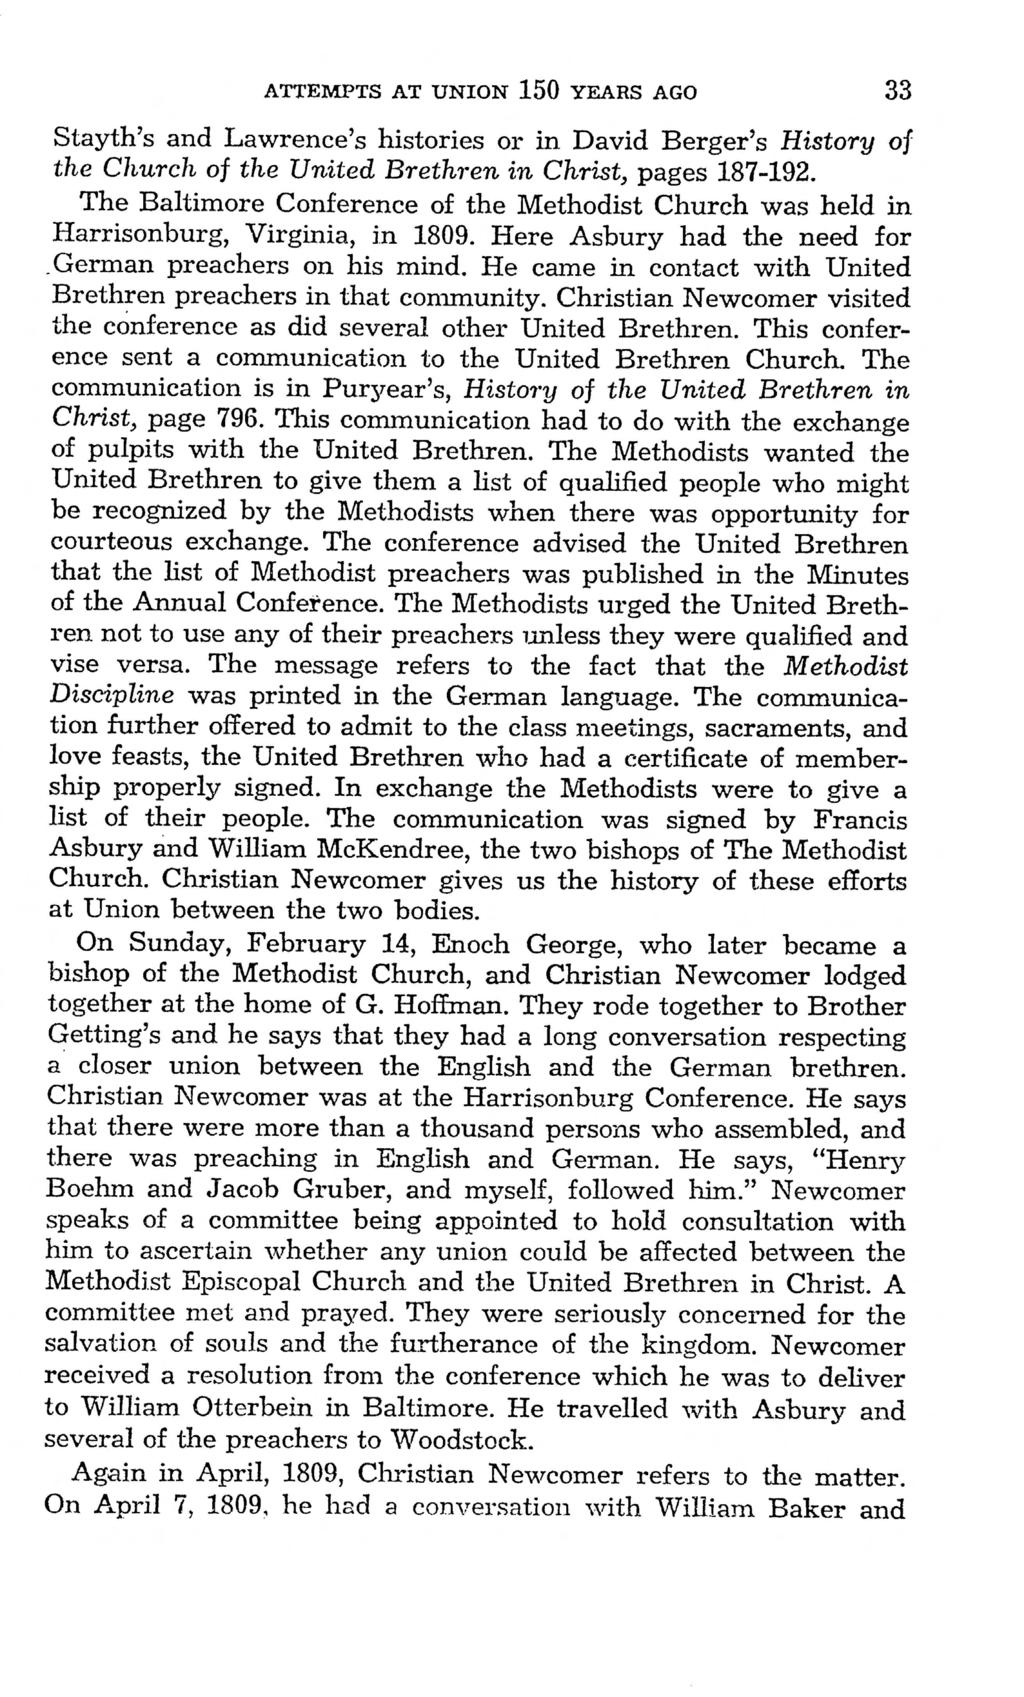 Stayth's and Lawrence's histories or in David Berger's History of the Church of the United Brethren in Christ, pages 187-192.